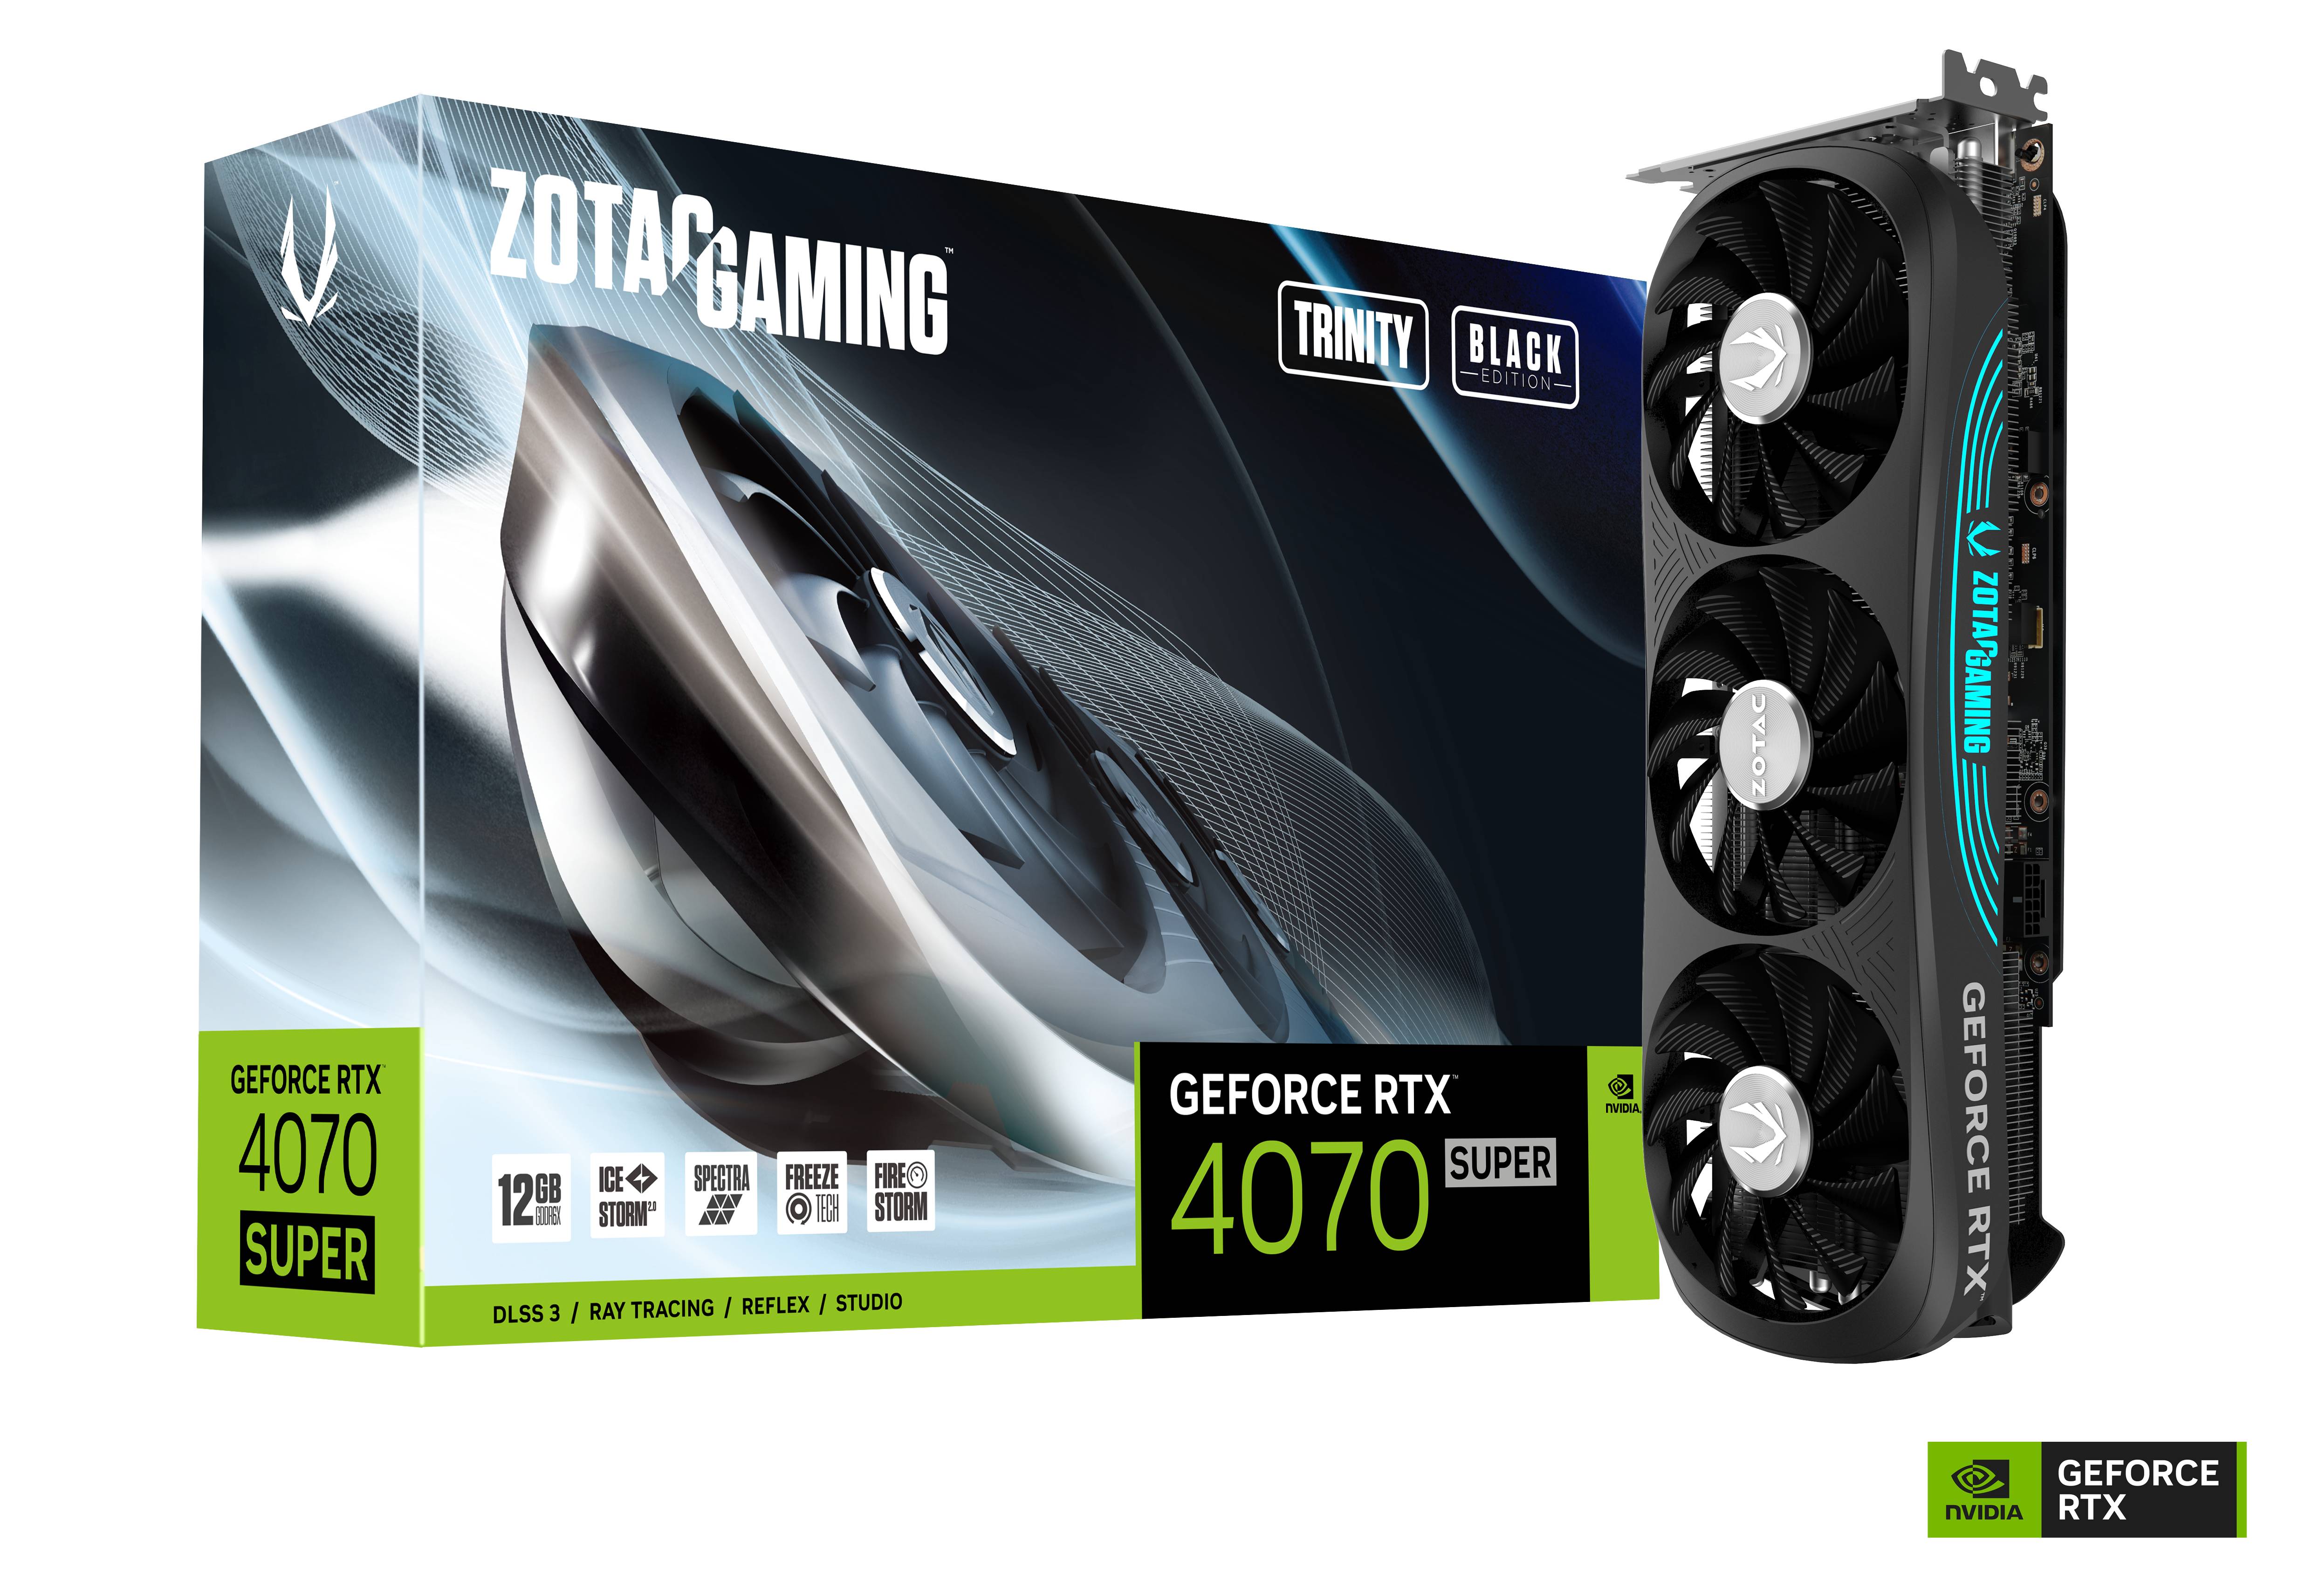 A large marketing image providing additional information about the product ZOTAC GAMING Geforce RTX 4070 SUPER Trinity Black 12GB GDDR6X - Additional alt info not provided